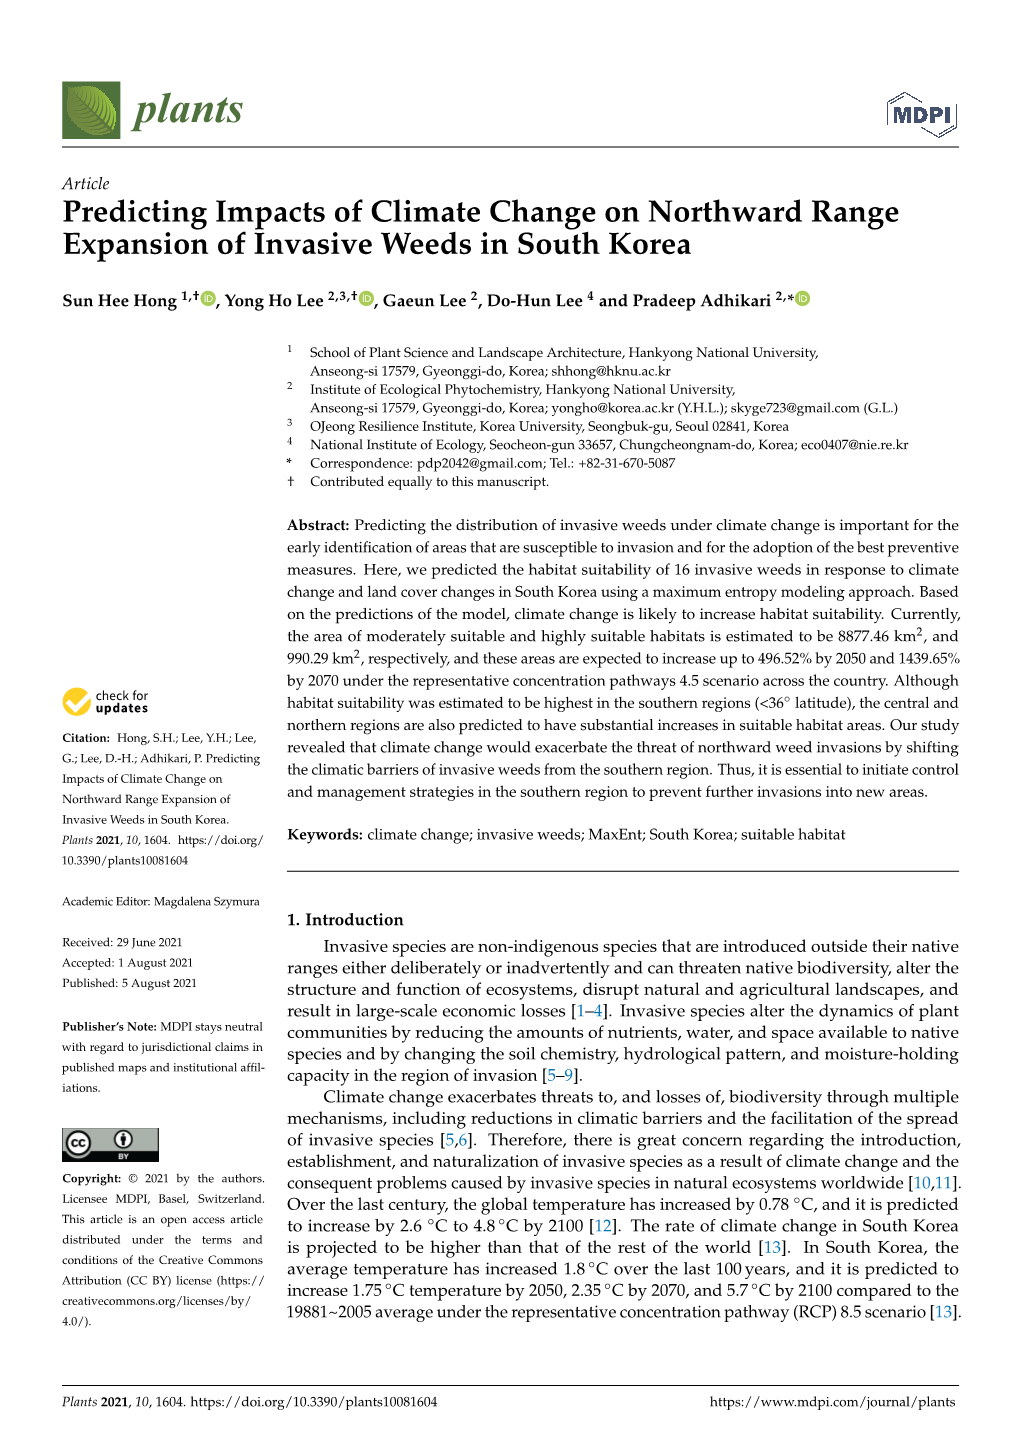 Predicting Impacts of Climate Change on Northward Range Expansion of Invasive Weeds in South Korea